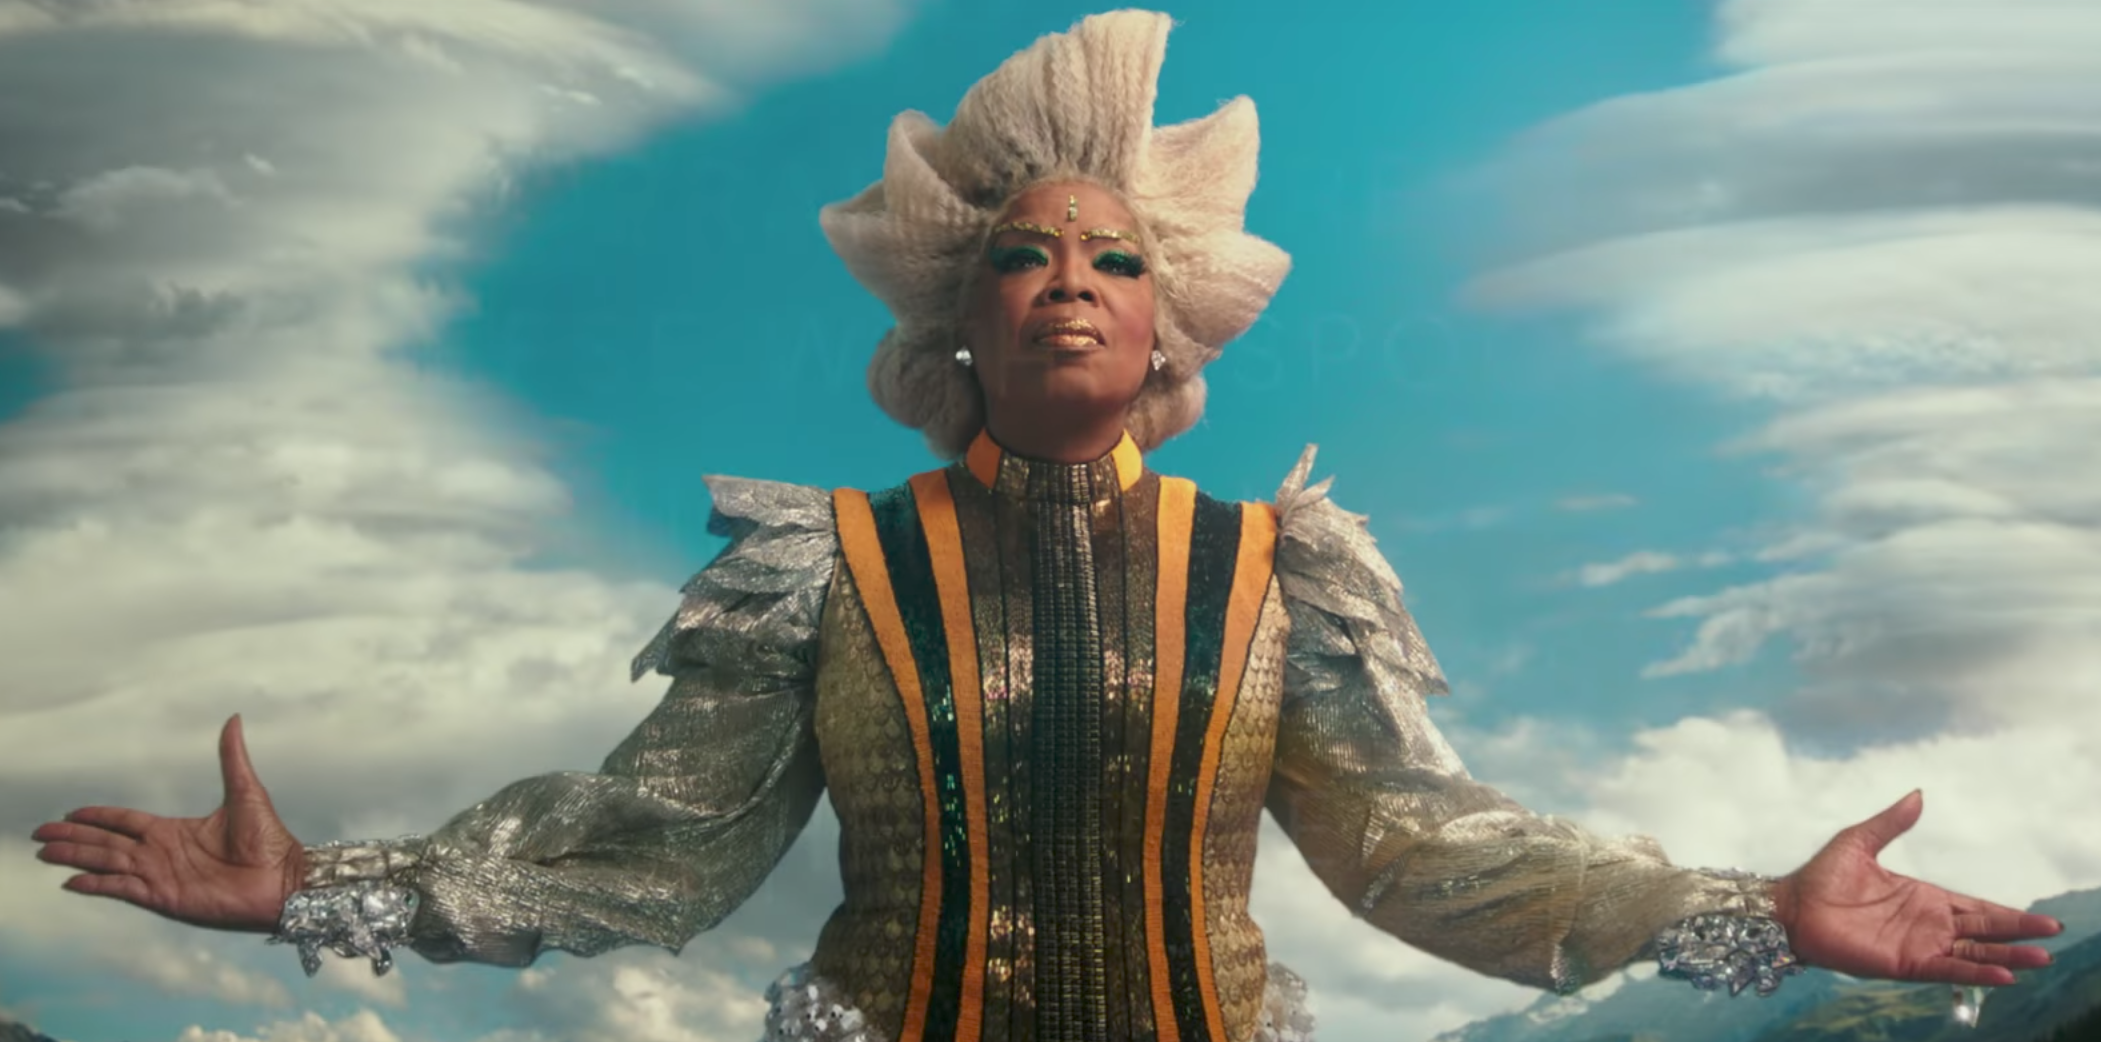 New Campaign Created For Low-Income Kids To See ‘A Wrinkle In Time’ For Free 
